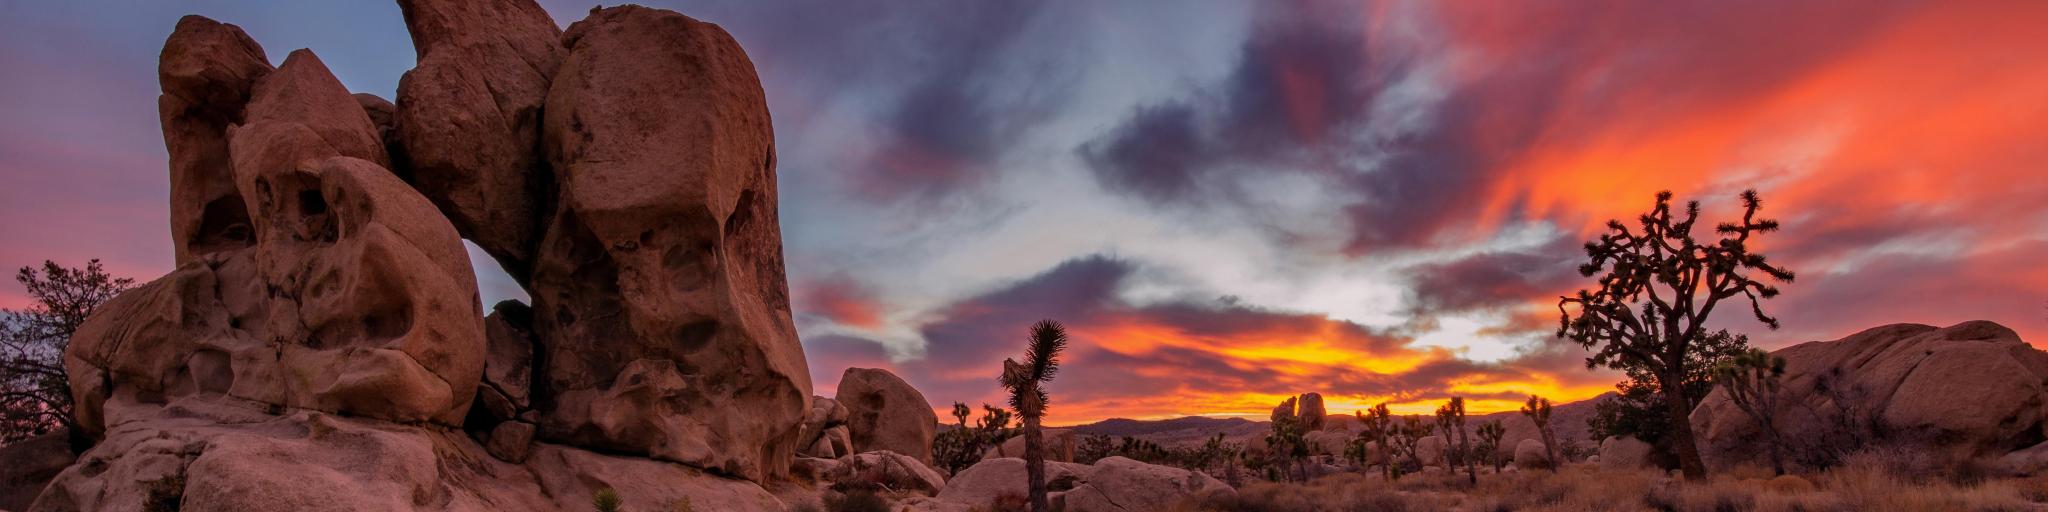 Joshua Tree National Park with a vibrant sunset in the background